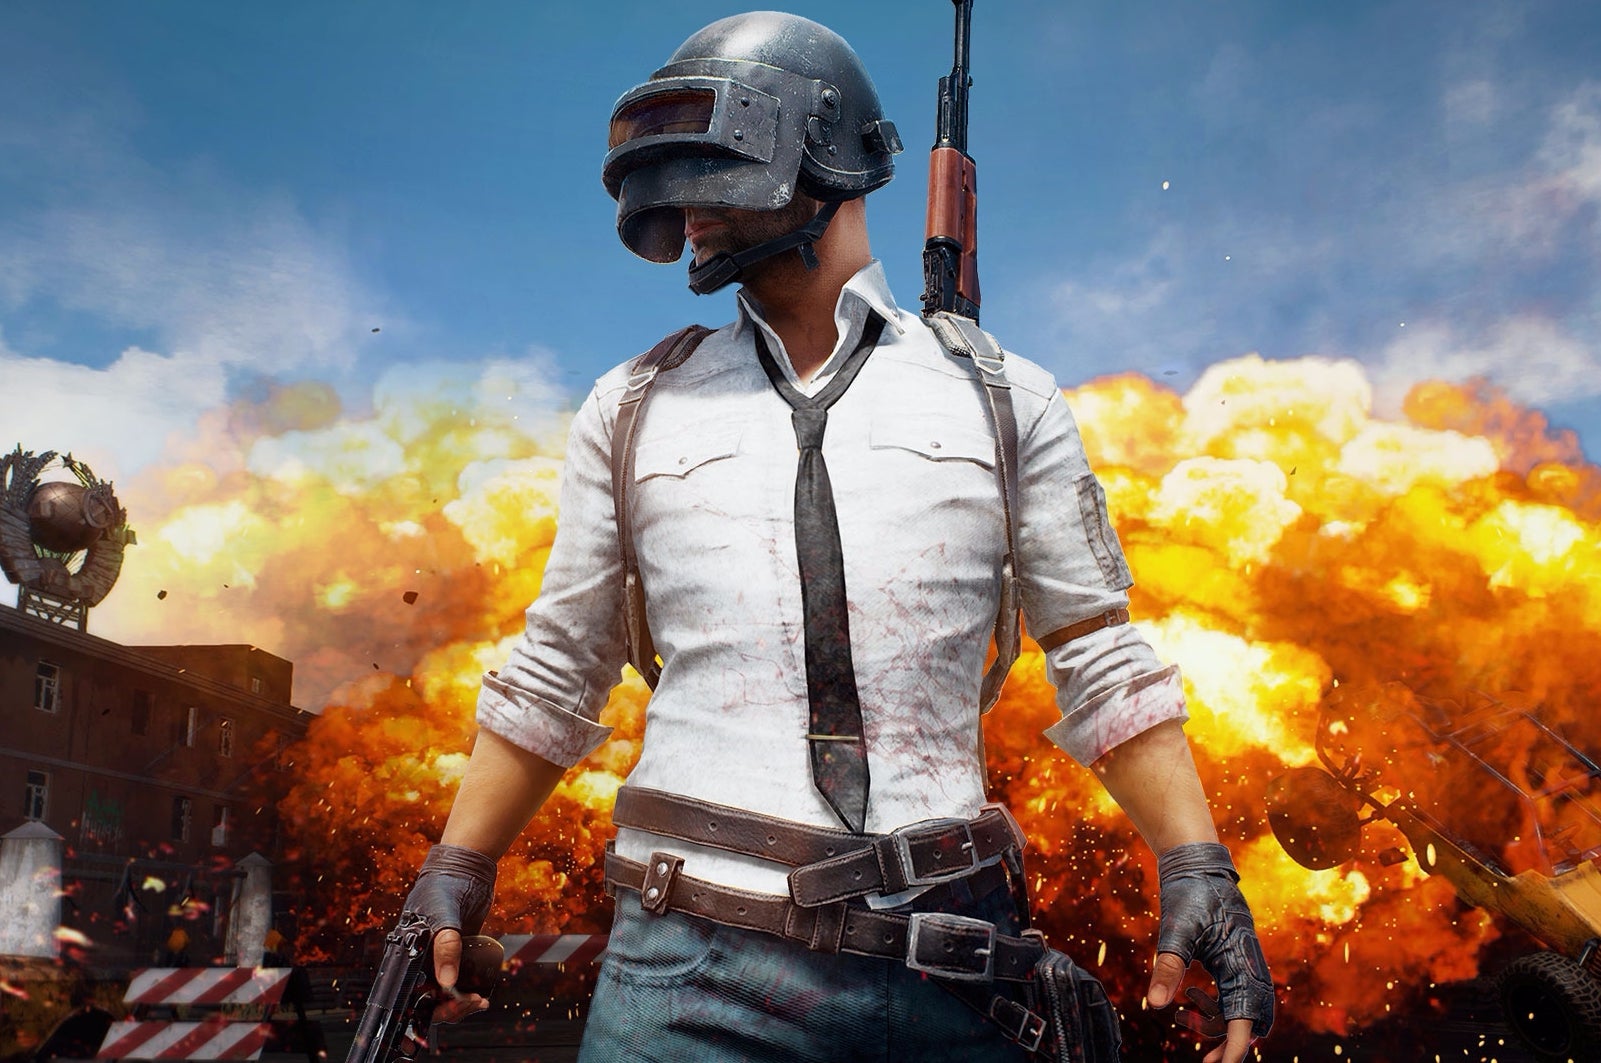 PUBG on Xbox One lets you view the PC settings screen | Eurogamer.net